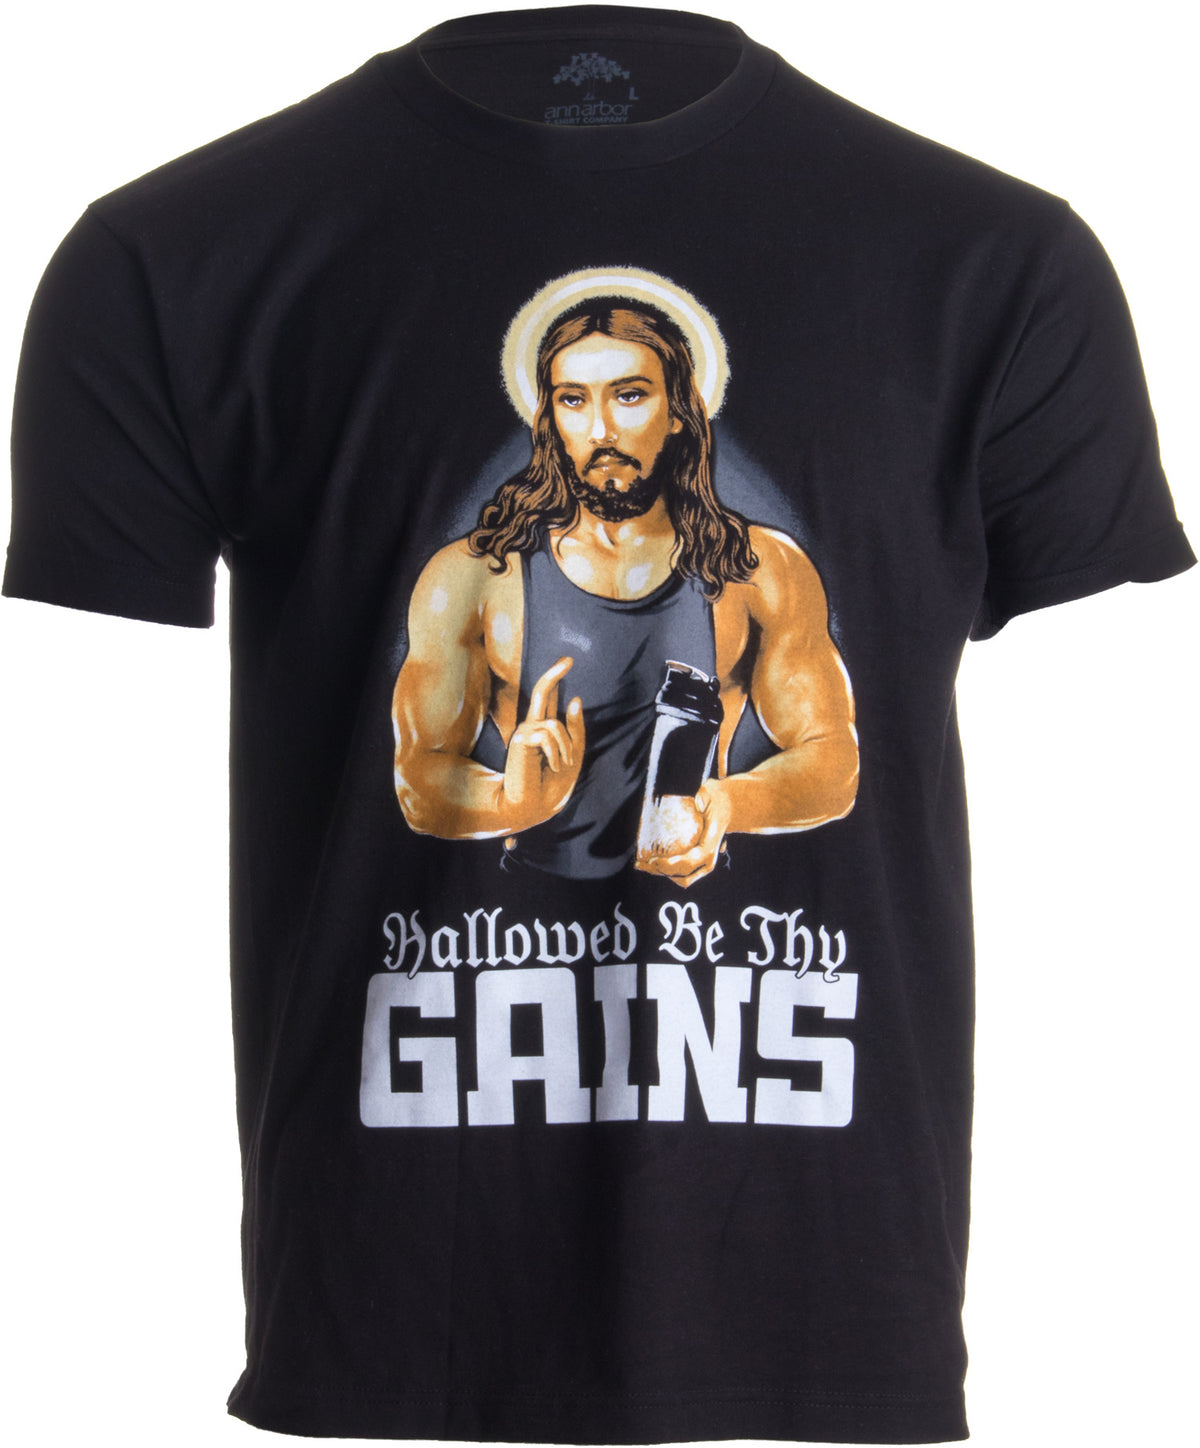 Hallowed Be Thy Gains | Funny Muscle Jesus Weight Lifting Work Out Humor T-shirt